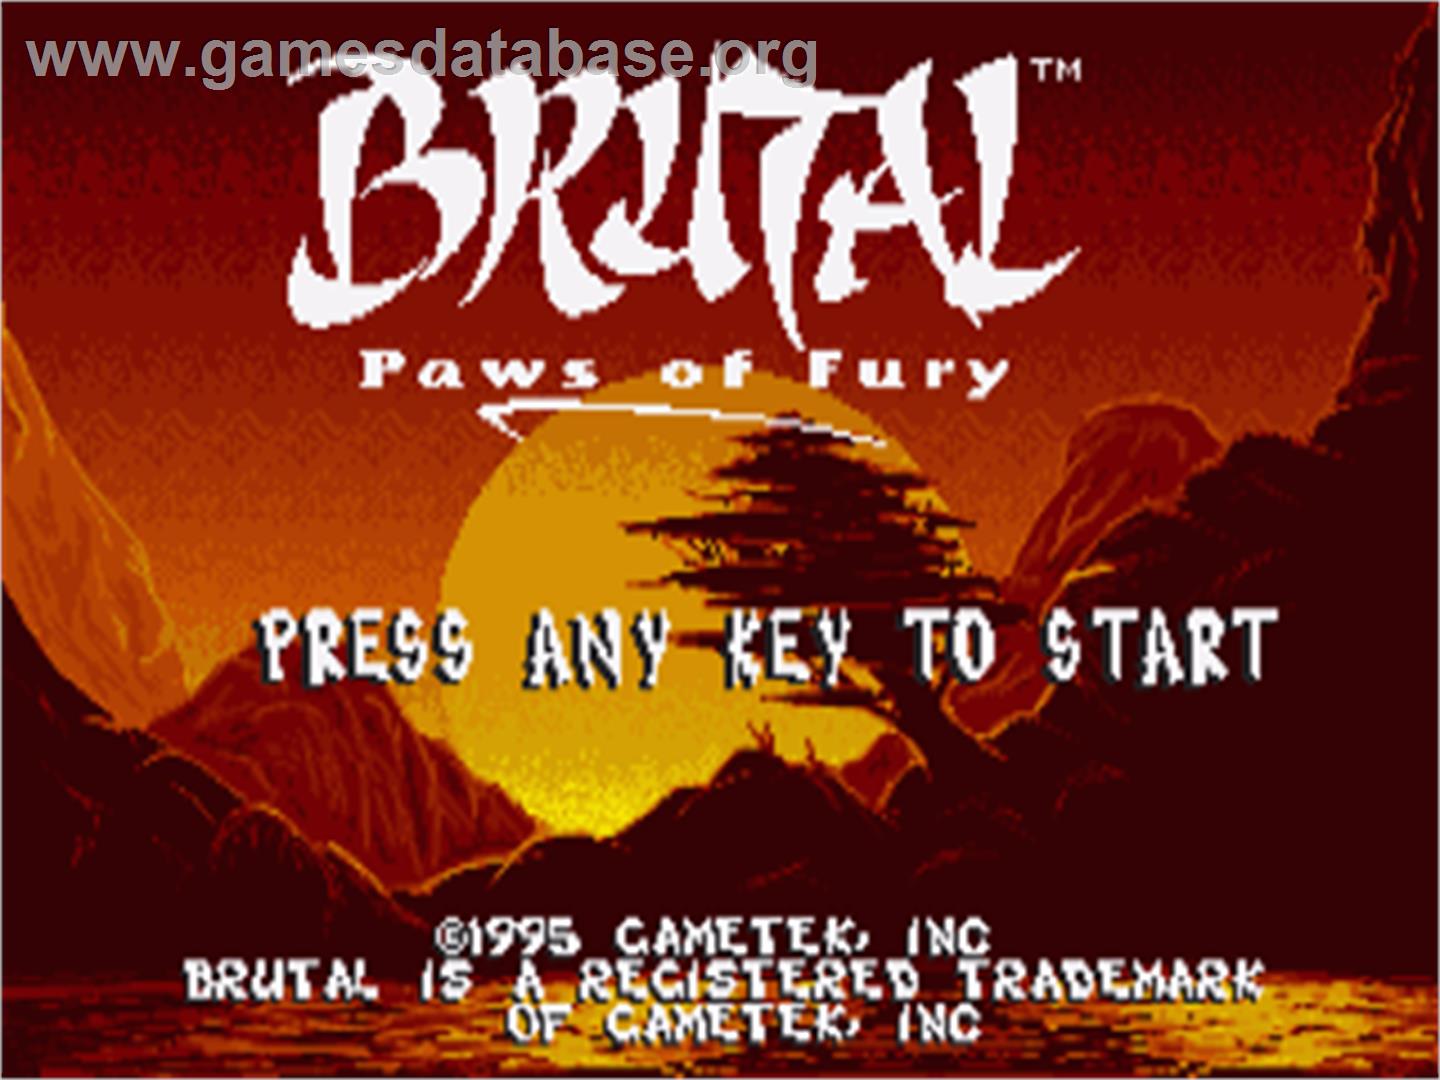 Brutal: Paws of Fury - Commodore Amiga - Artwork - Title Screen